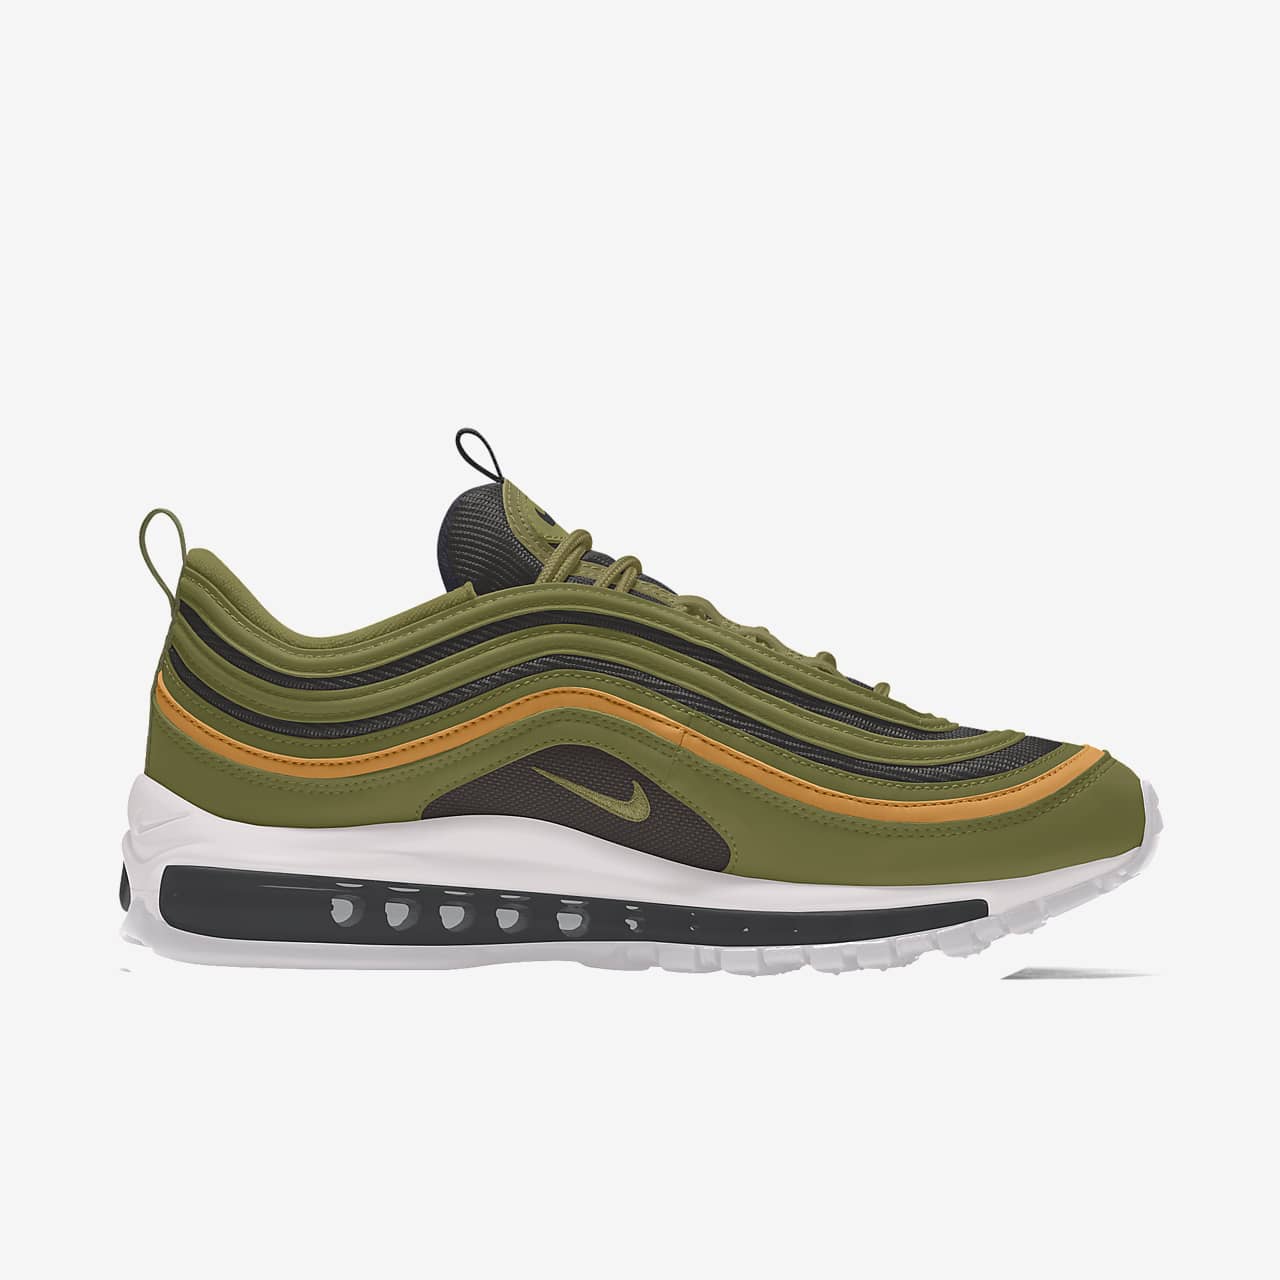 nike by you air max 97